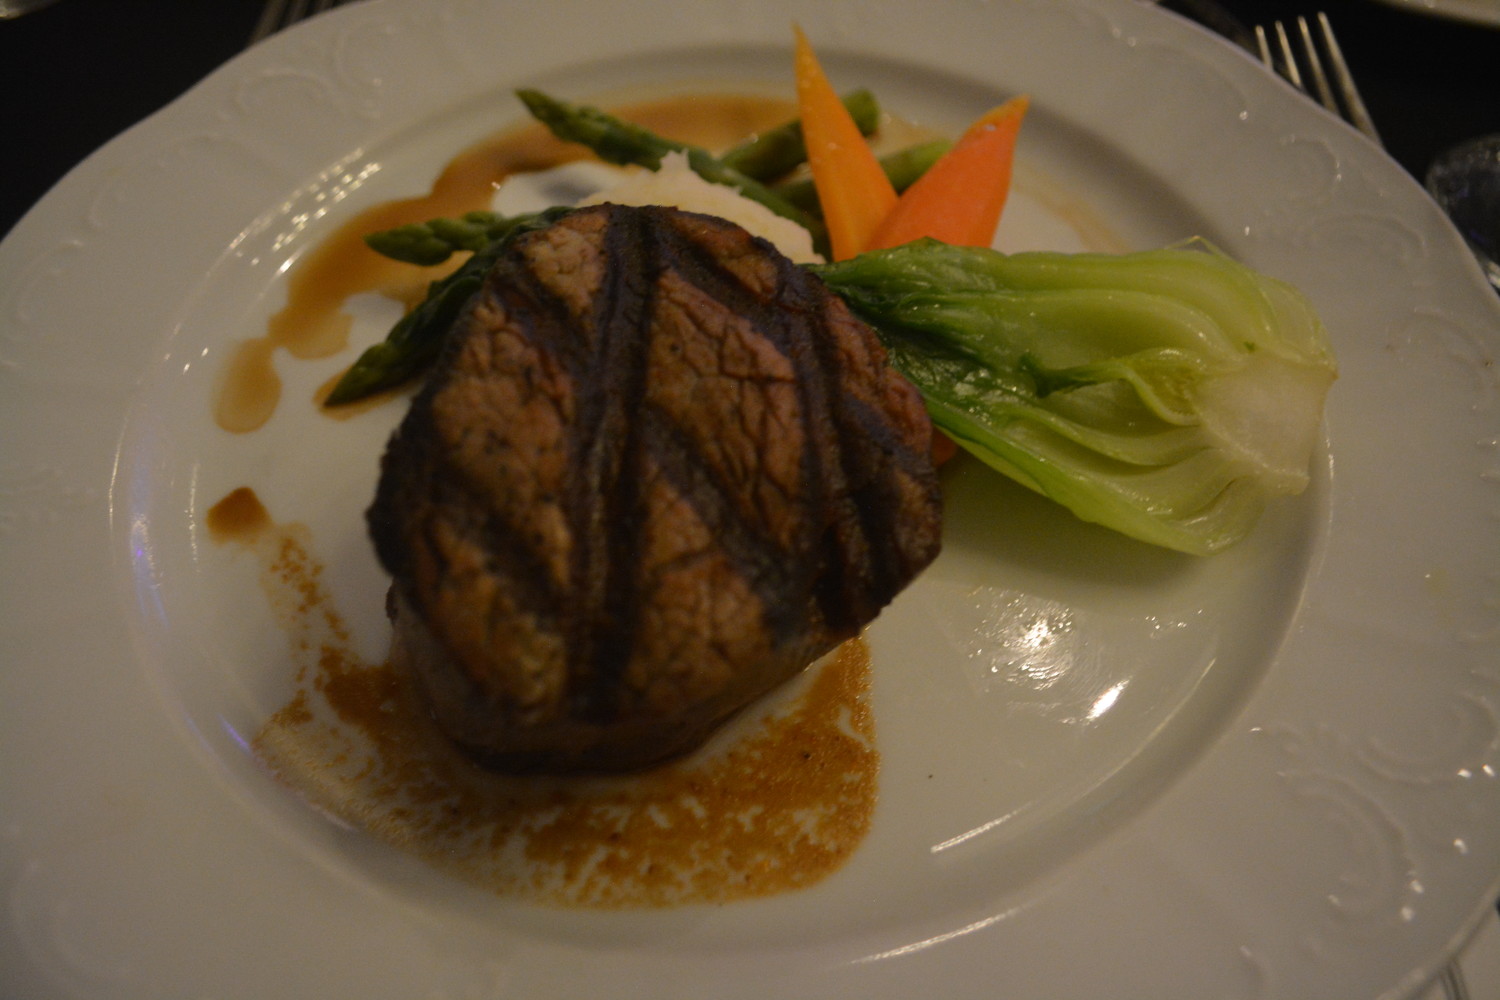 A filet mignon dinner is served at the Grand Anchor Gala.